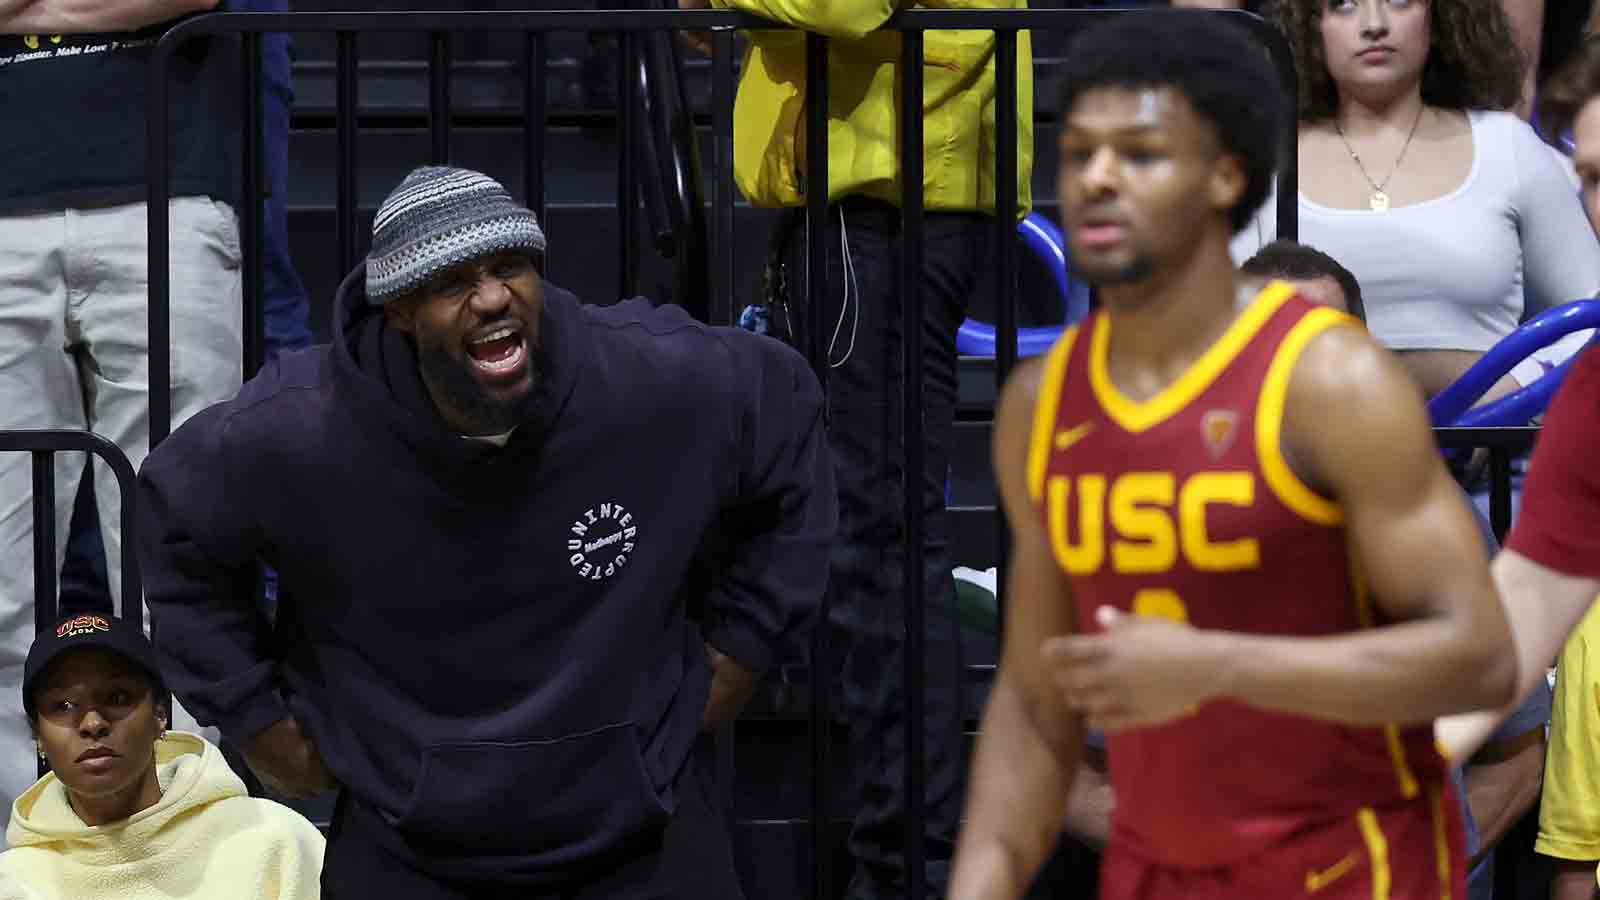 NBA teams told Bronny James is medically cleared to play, AP reports